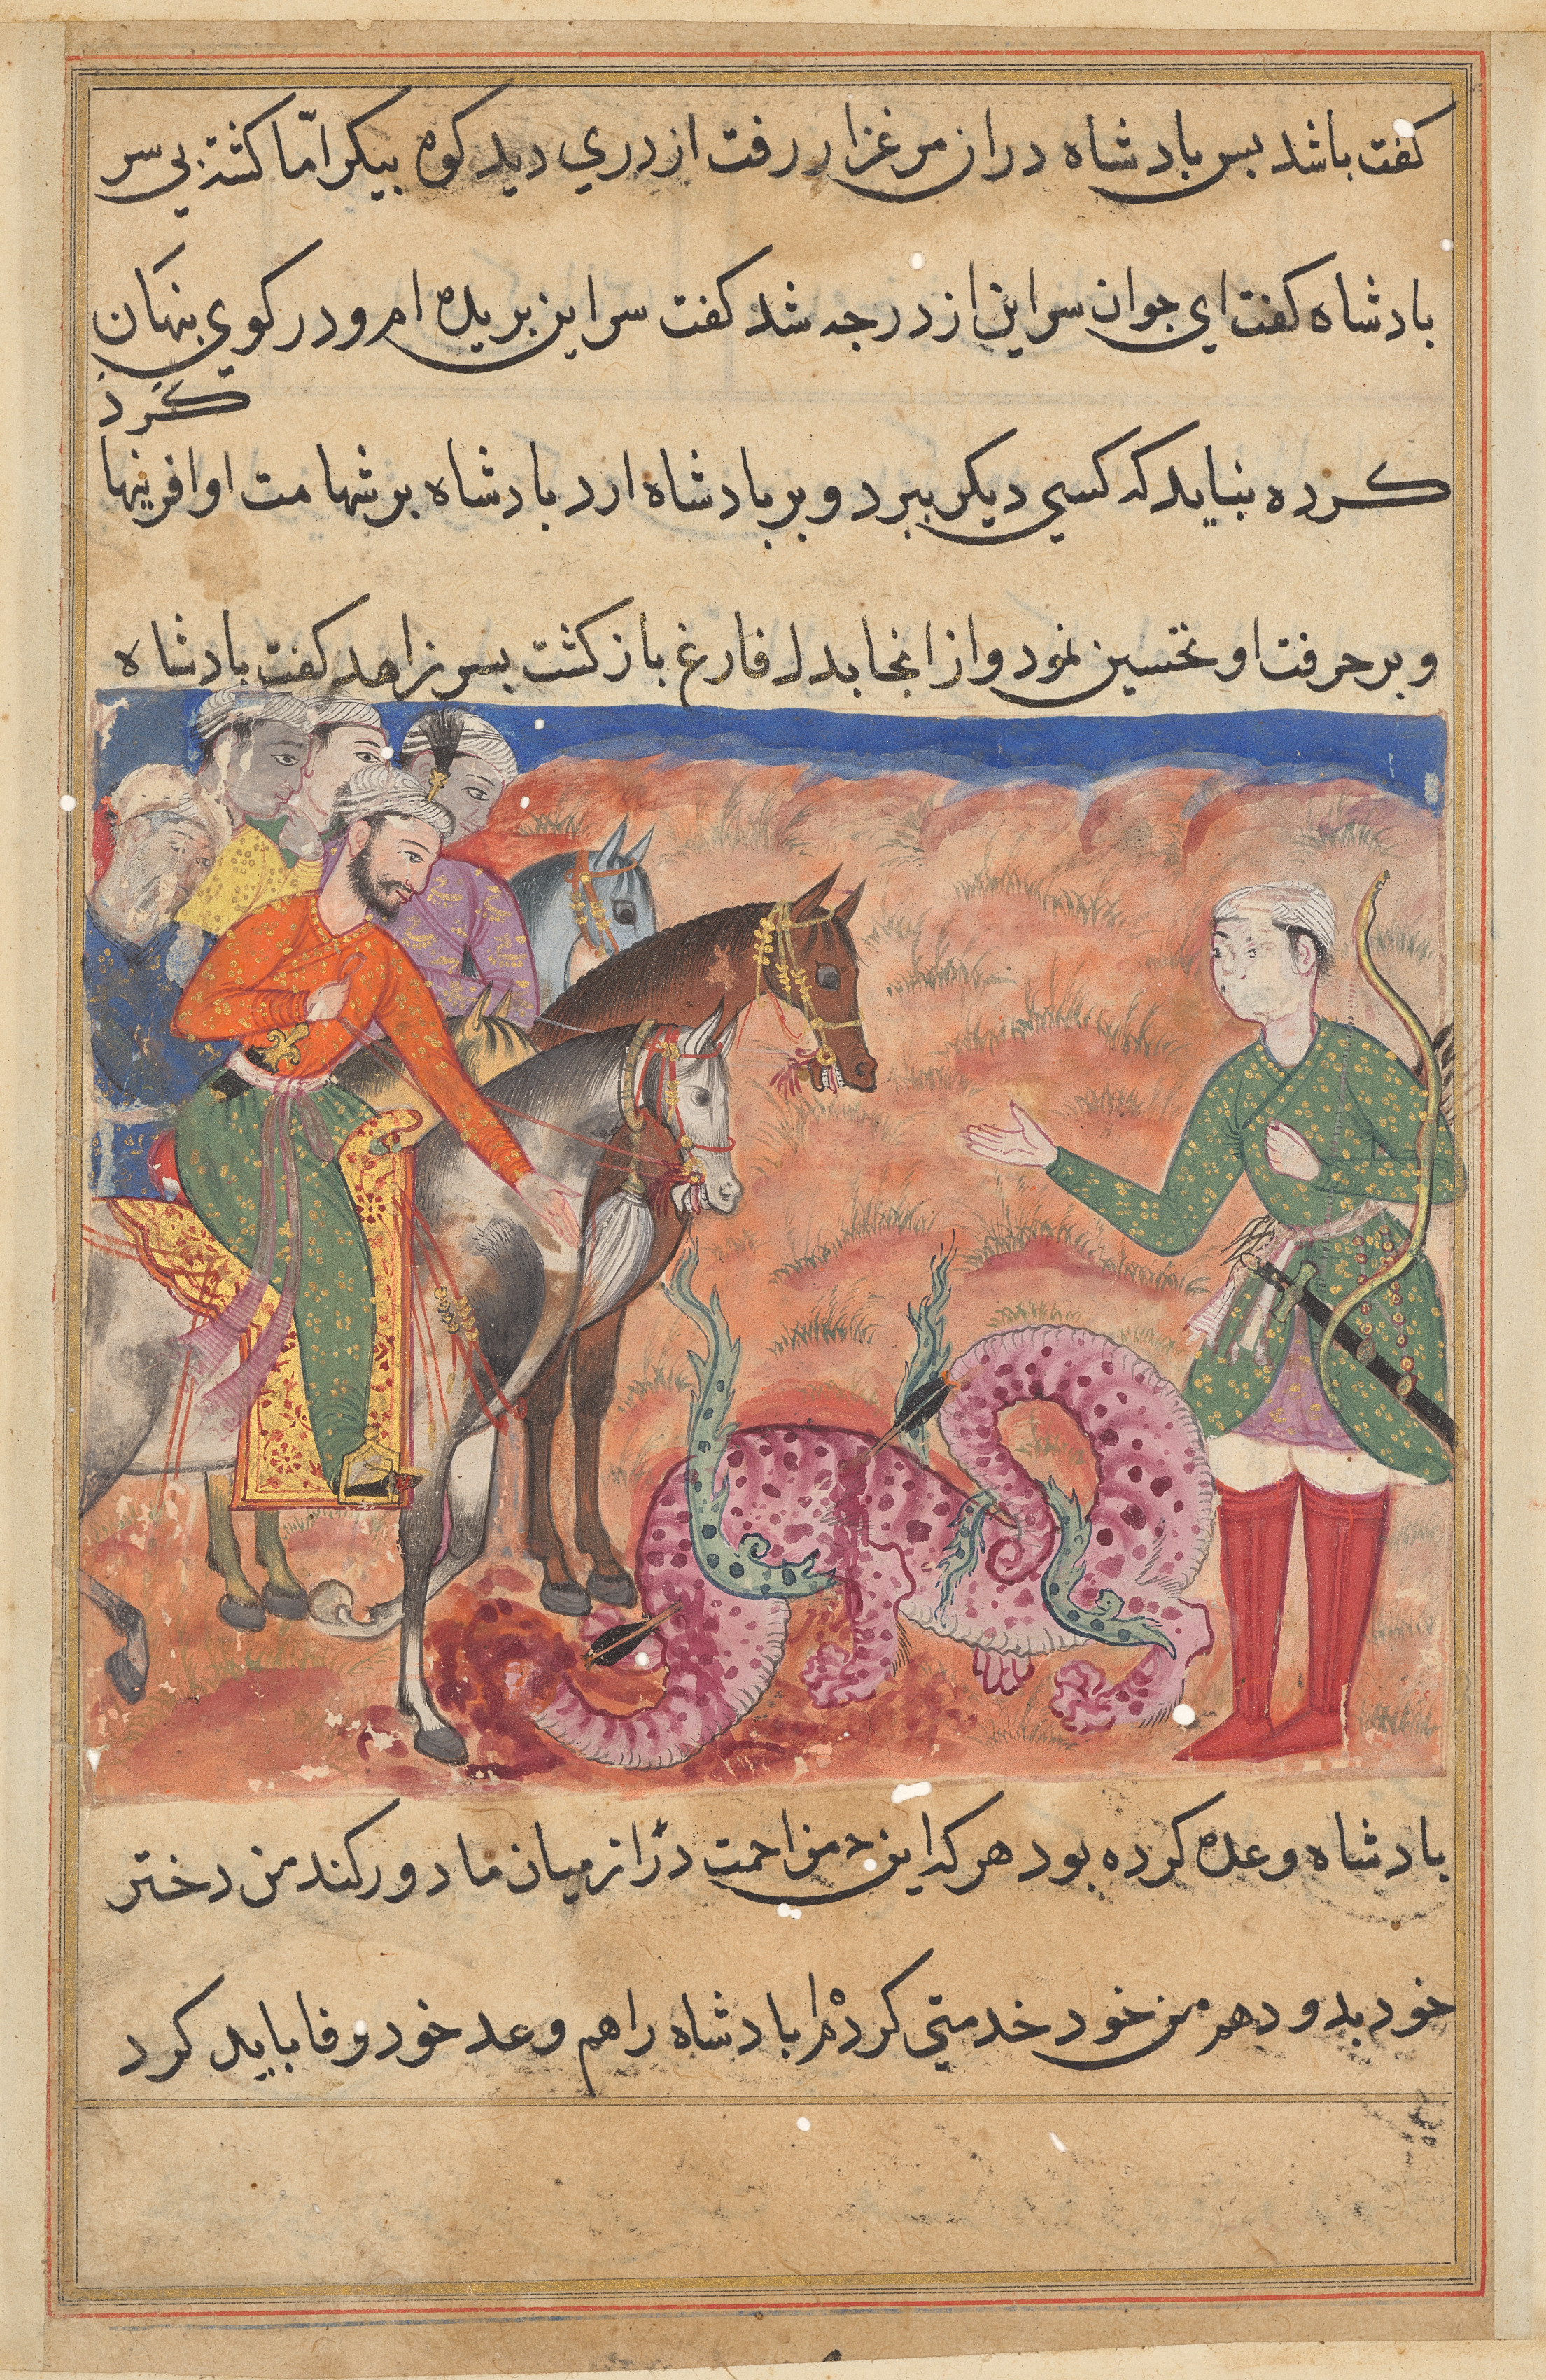 The pious man’s son presents the slain dragon to the king, from a Tuti-nama (Tales of a Parrot): Fifty-second Night